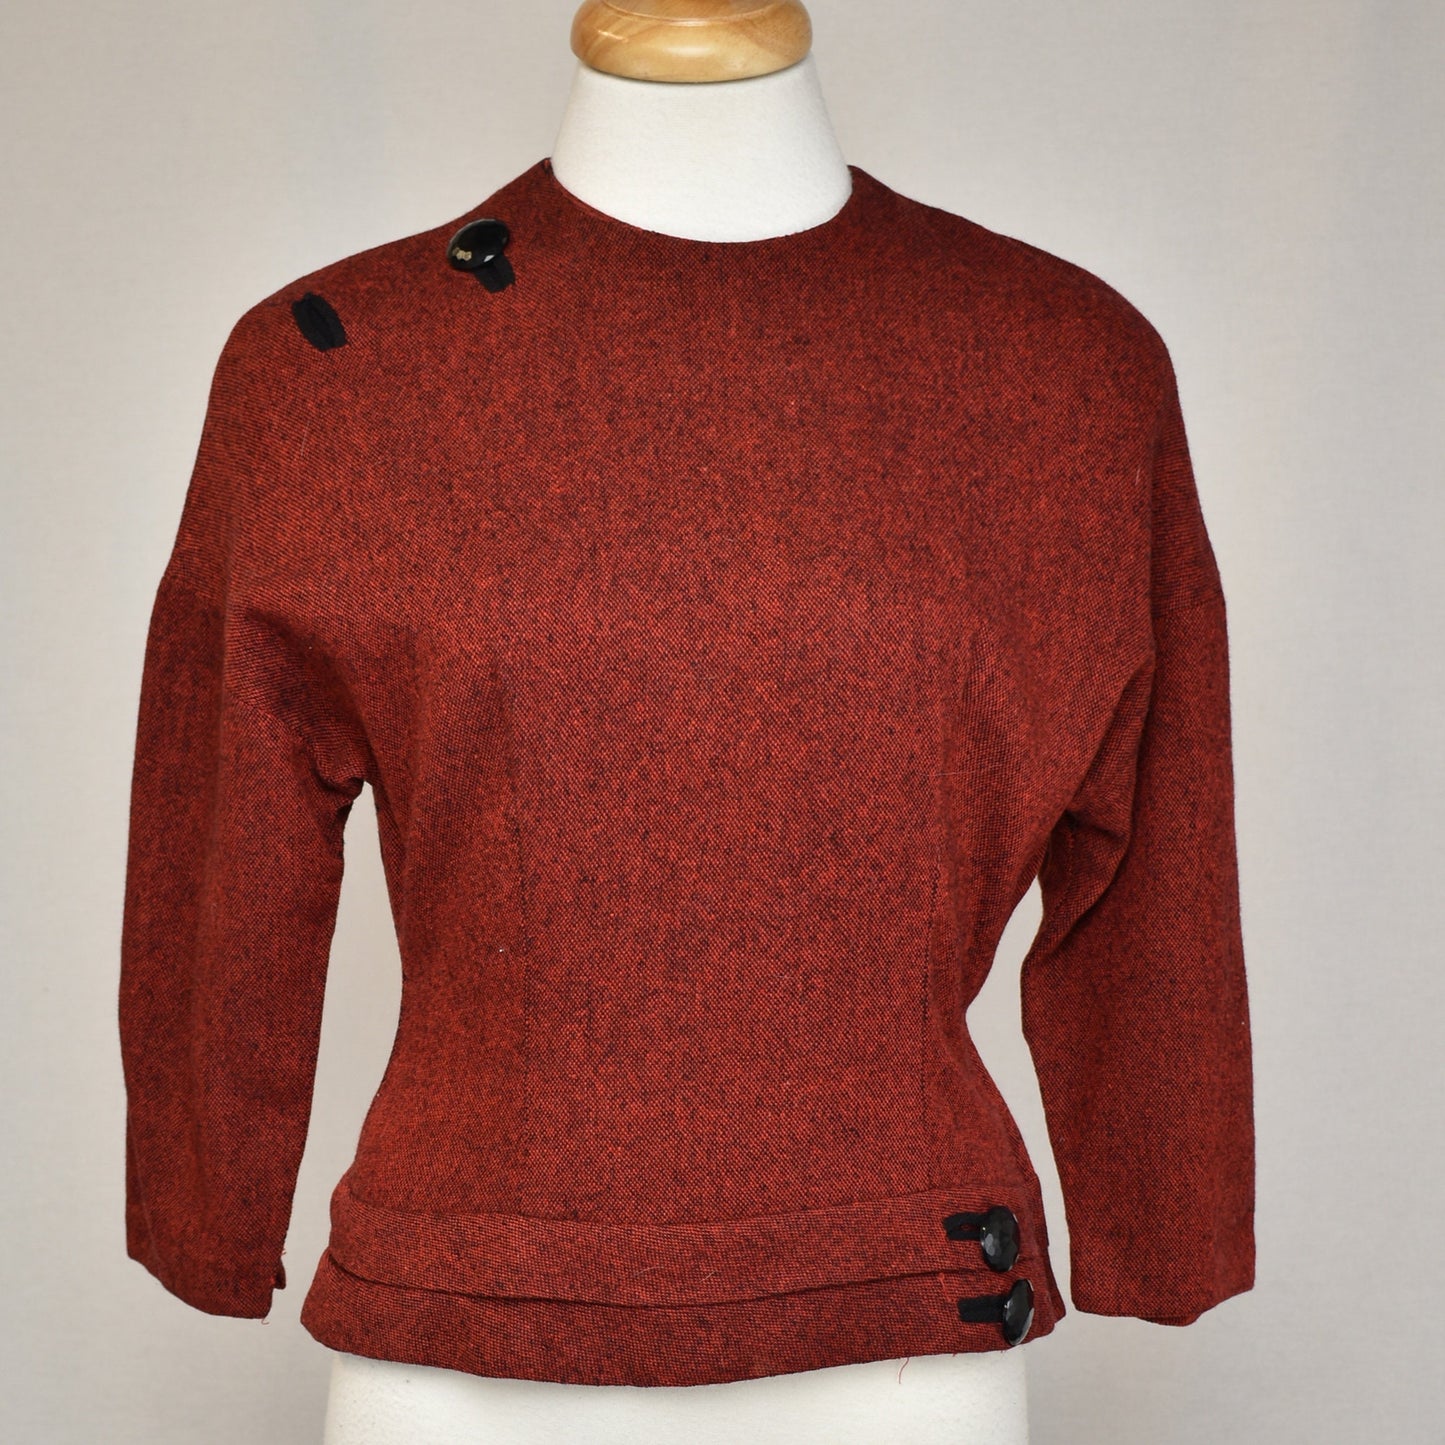 Vintage 1950s Red Wool Top - Fifties Blouse - Fancy Winter Party Top - Minx Modes Junior